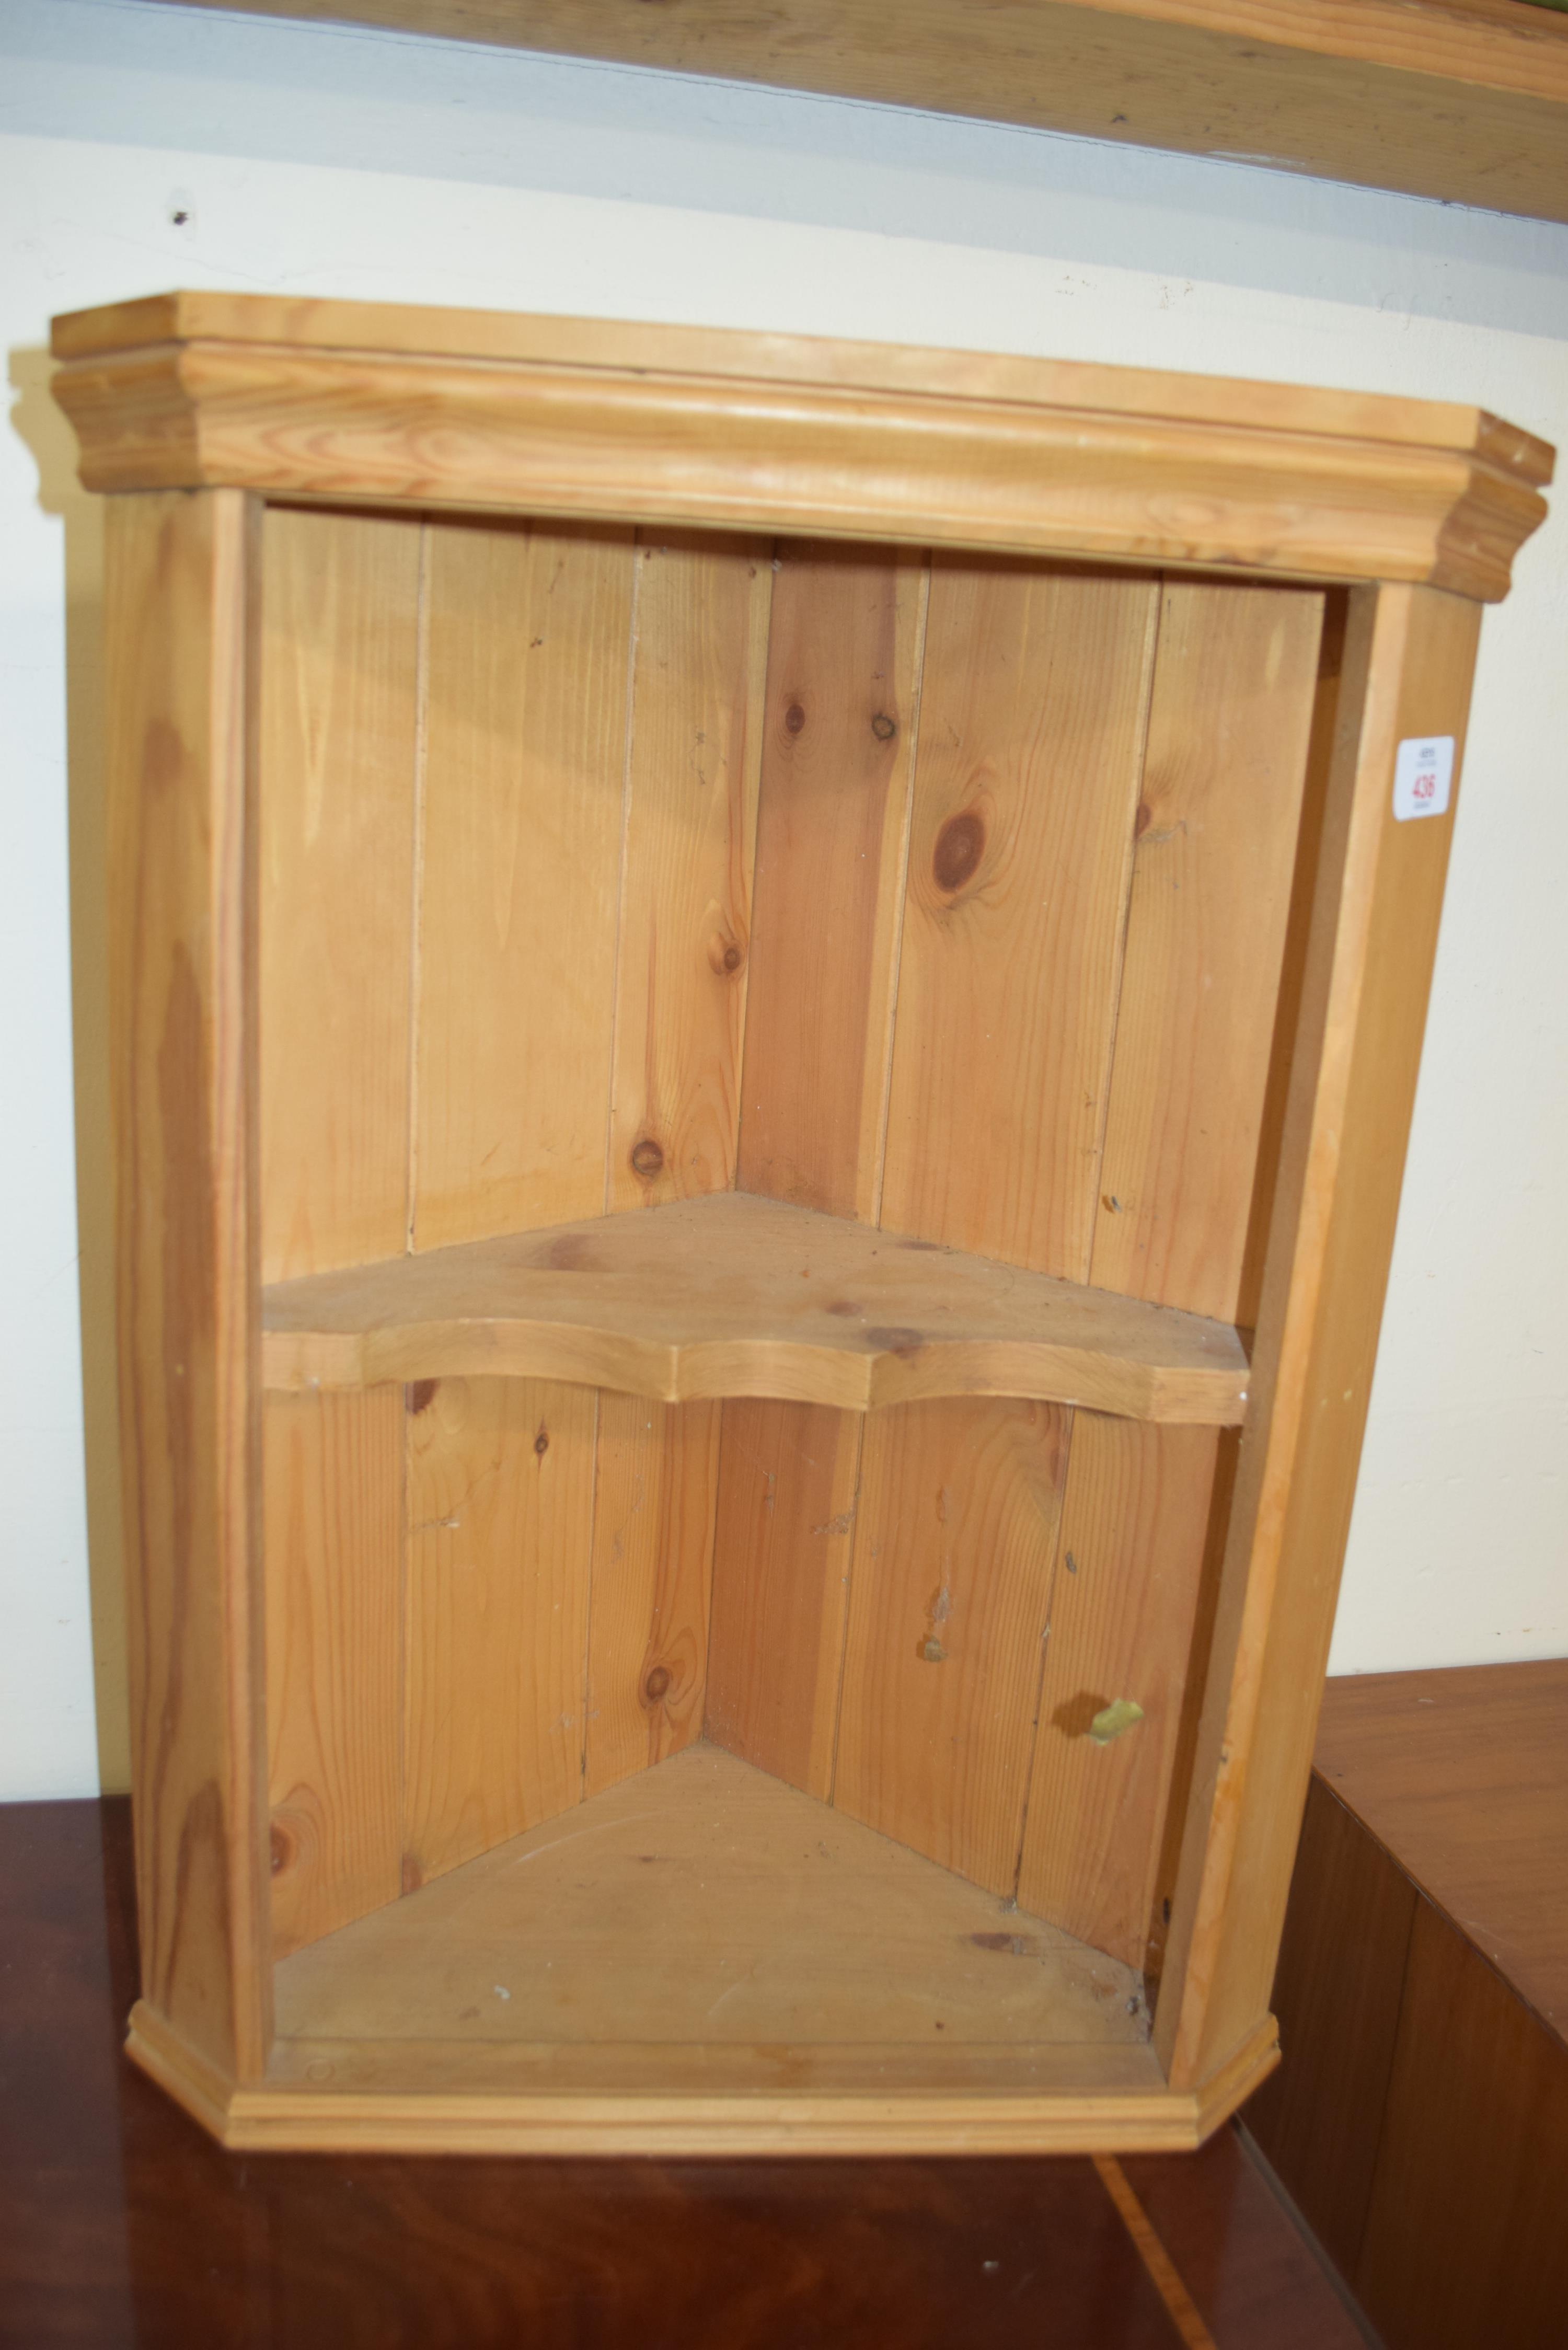 SMALL PINE WALL MOUNTED CORNER CABINET, 53CM HIGH